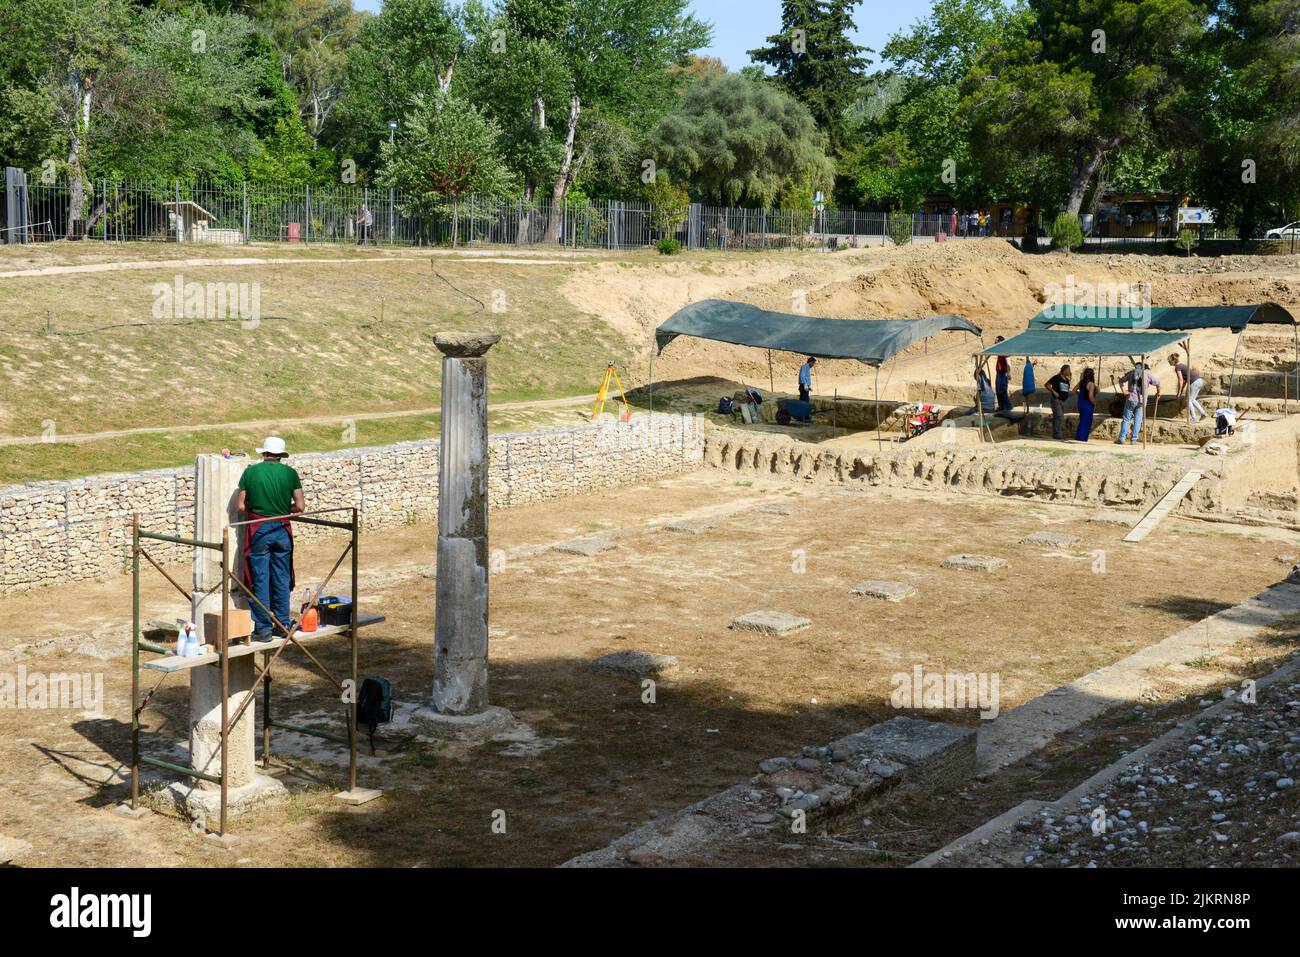 Ancient Olympia, Greece - 25 May 2022: View at the archeological site of Ancient Olympia on Greece Stock Photo